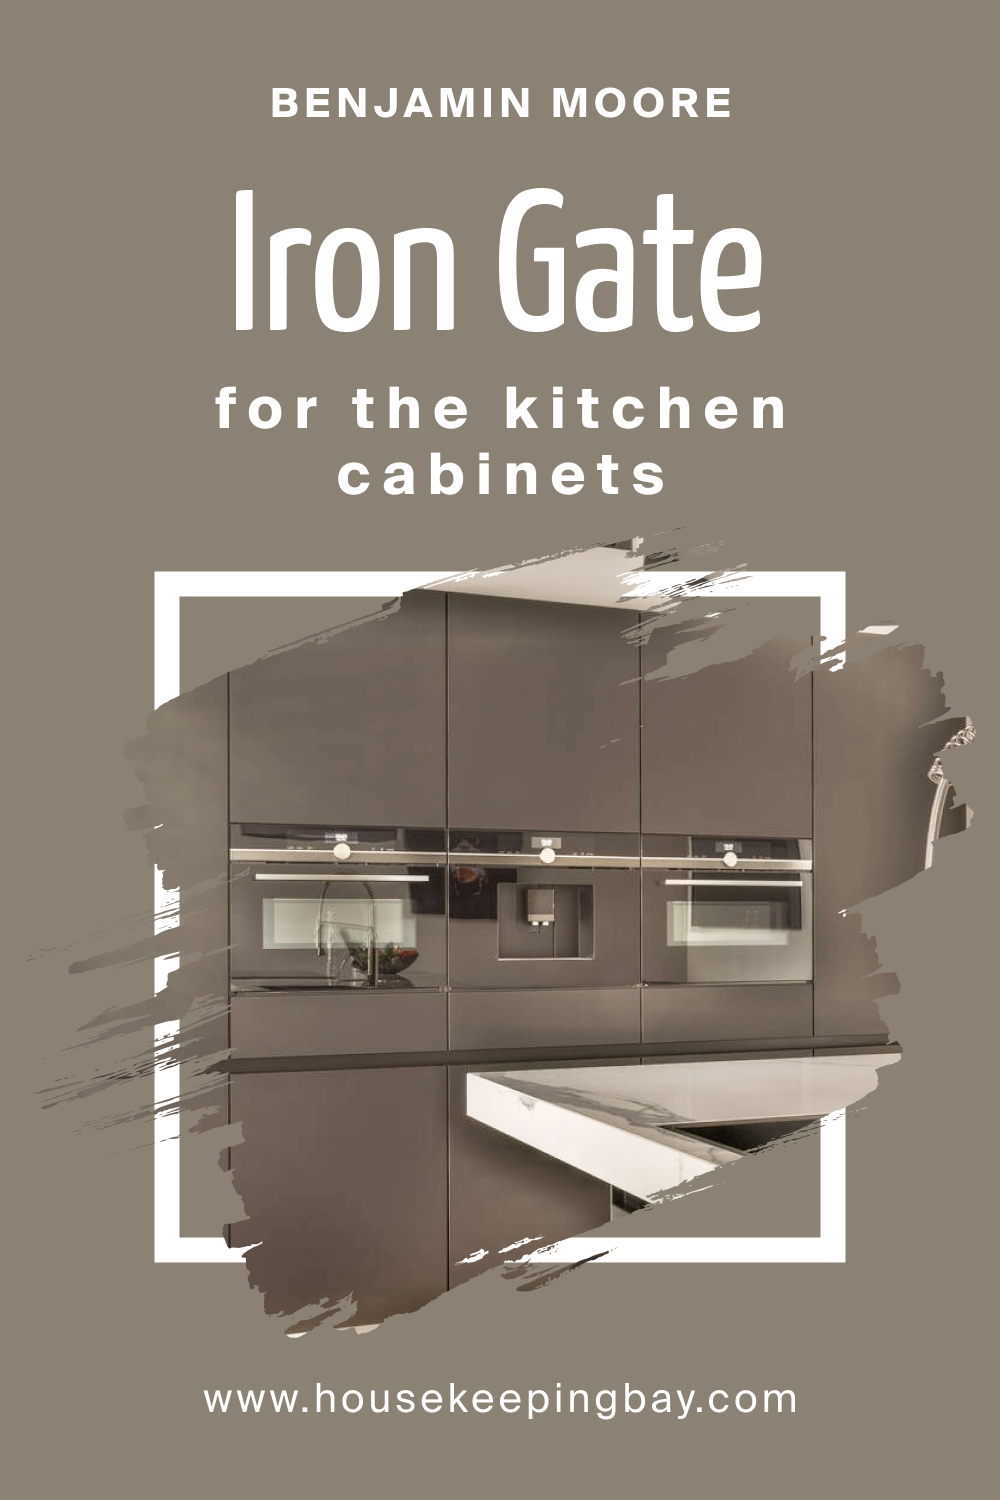 How to Use BM Iron Gate 1545 on the Kitchen Cabinets?